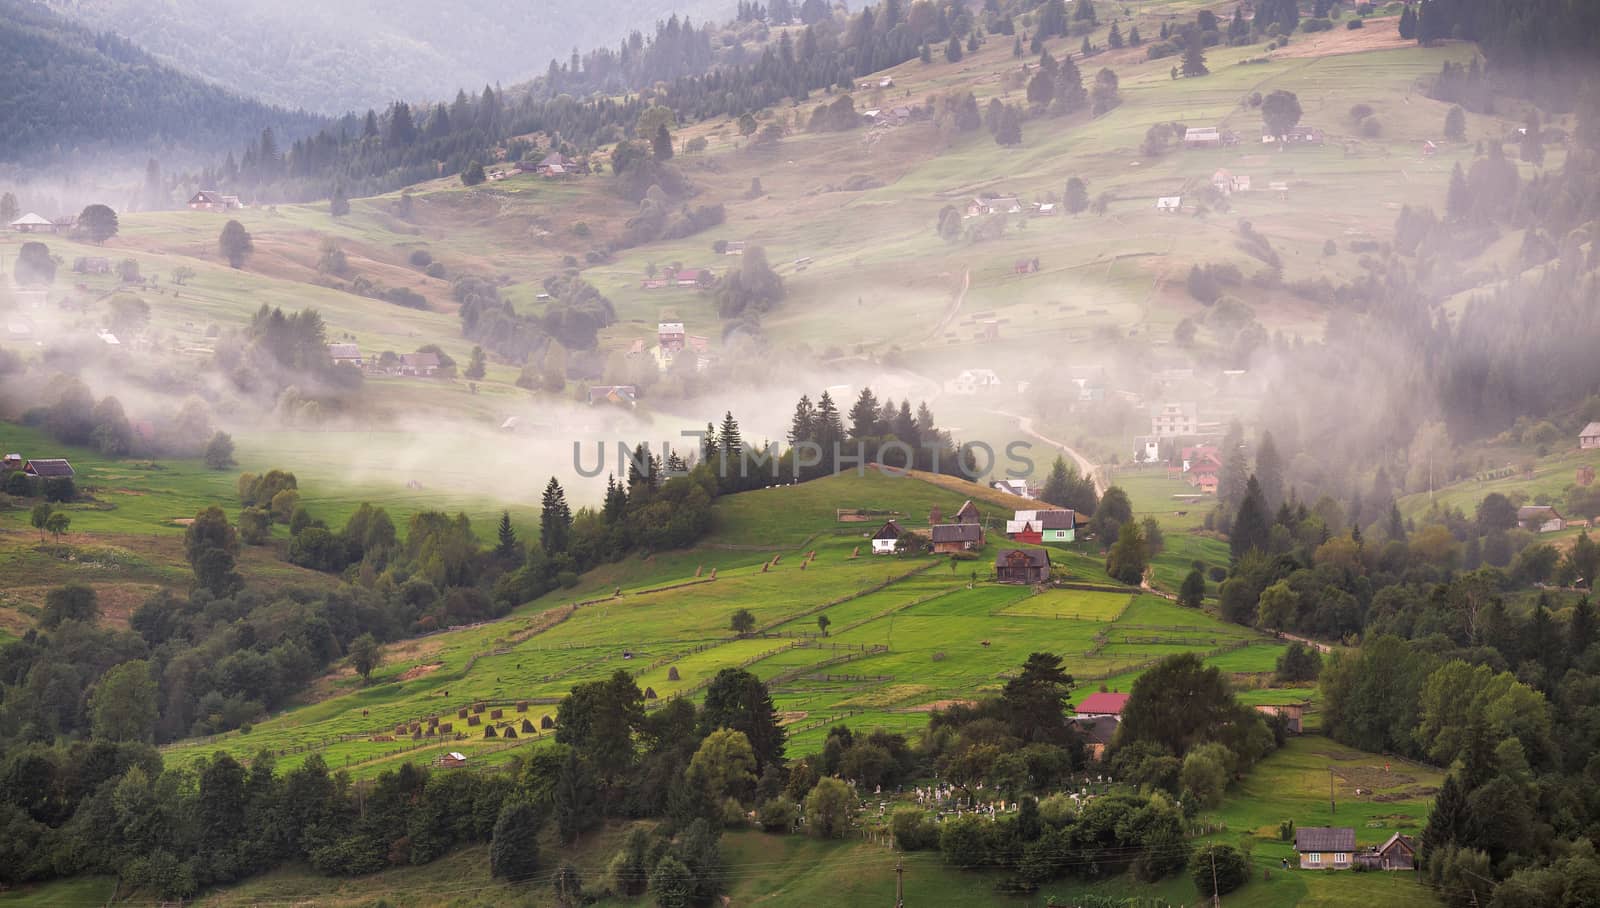 Alpine village in mountains. Smoke and haze over the hills in Carpathians.